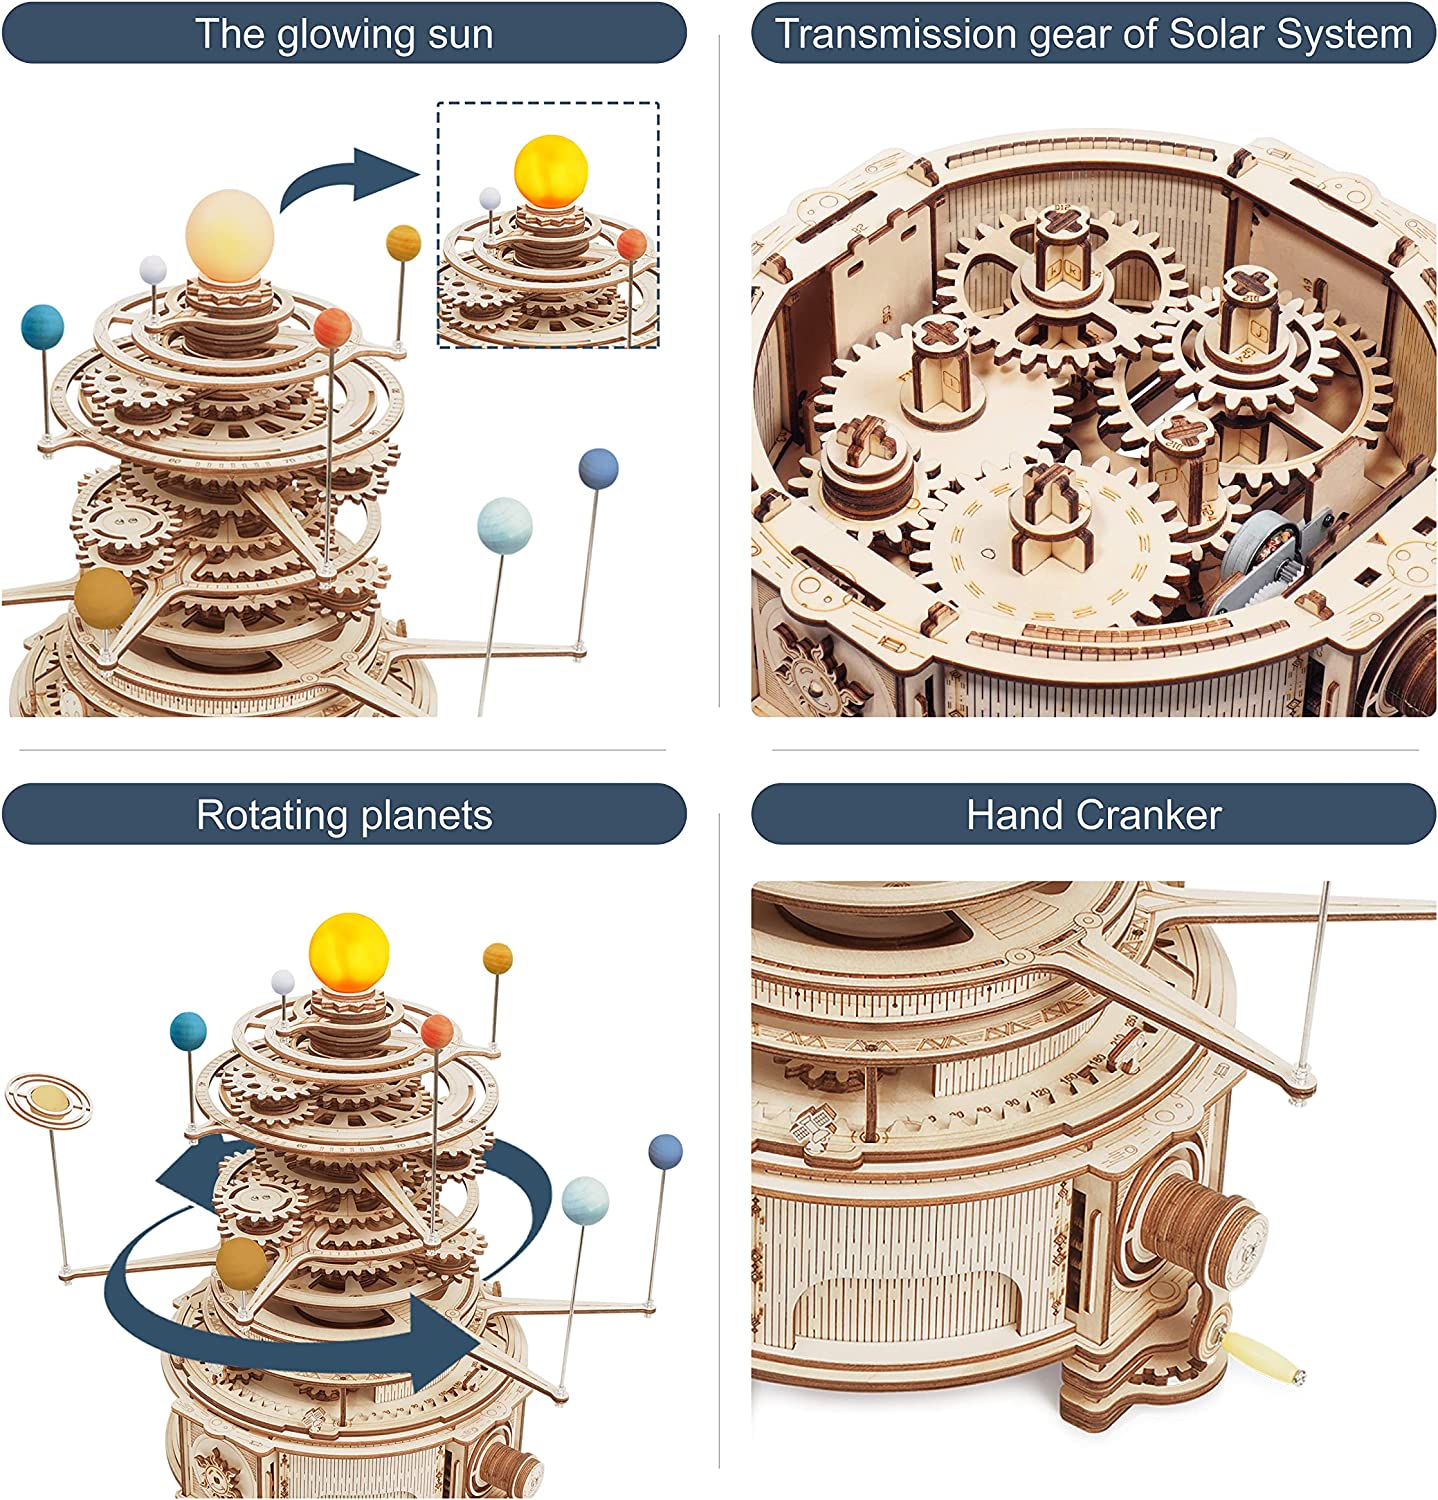 Robotime ROKR 316PCS Rotatable Mechanical Orrery 3D Wooden Puzzle Games Assemble Model Building Kits Toys Gift For Children Boys - TryKid